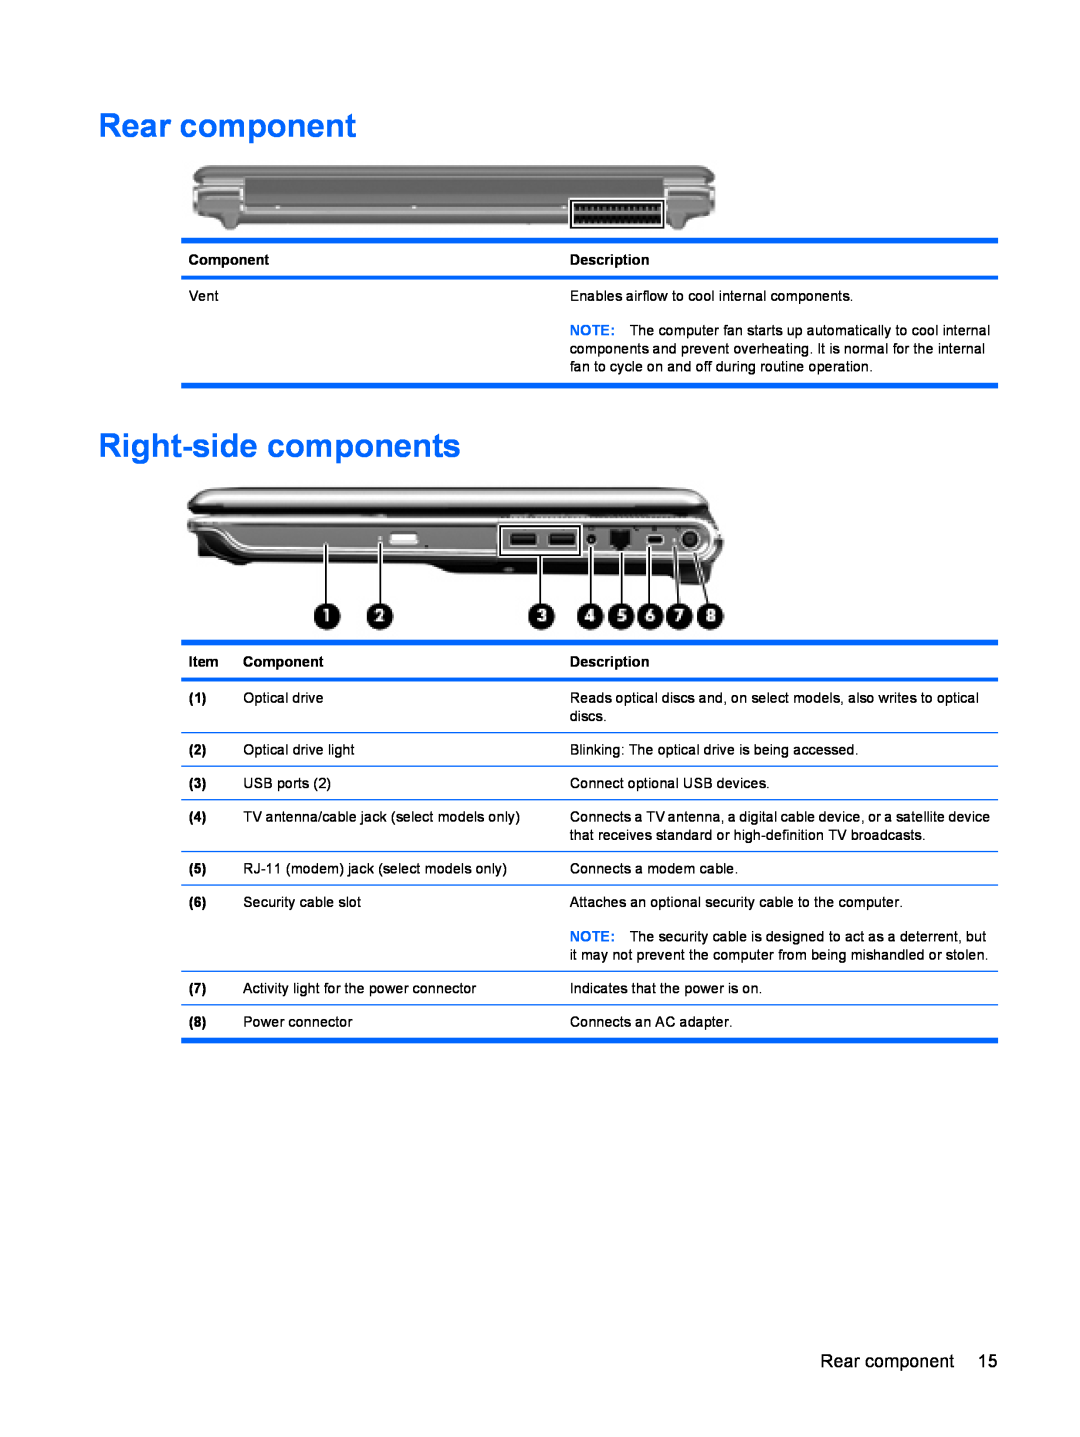 HP DV6 manual Rear component, Right-side components 